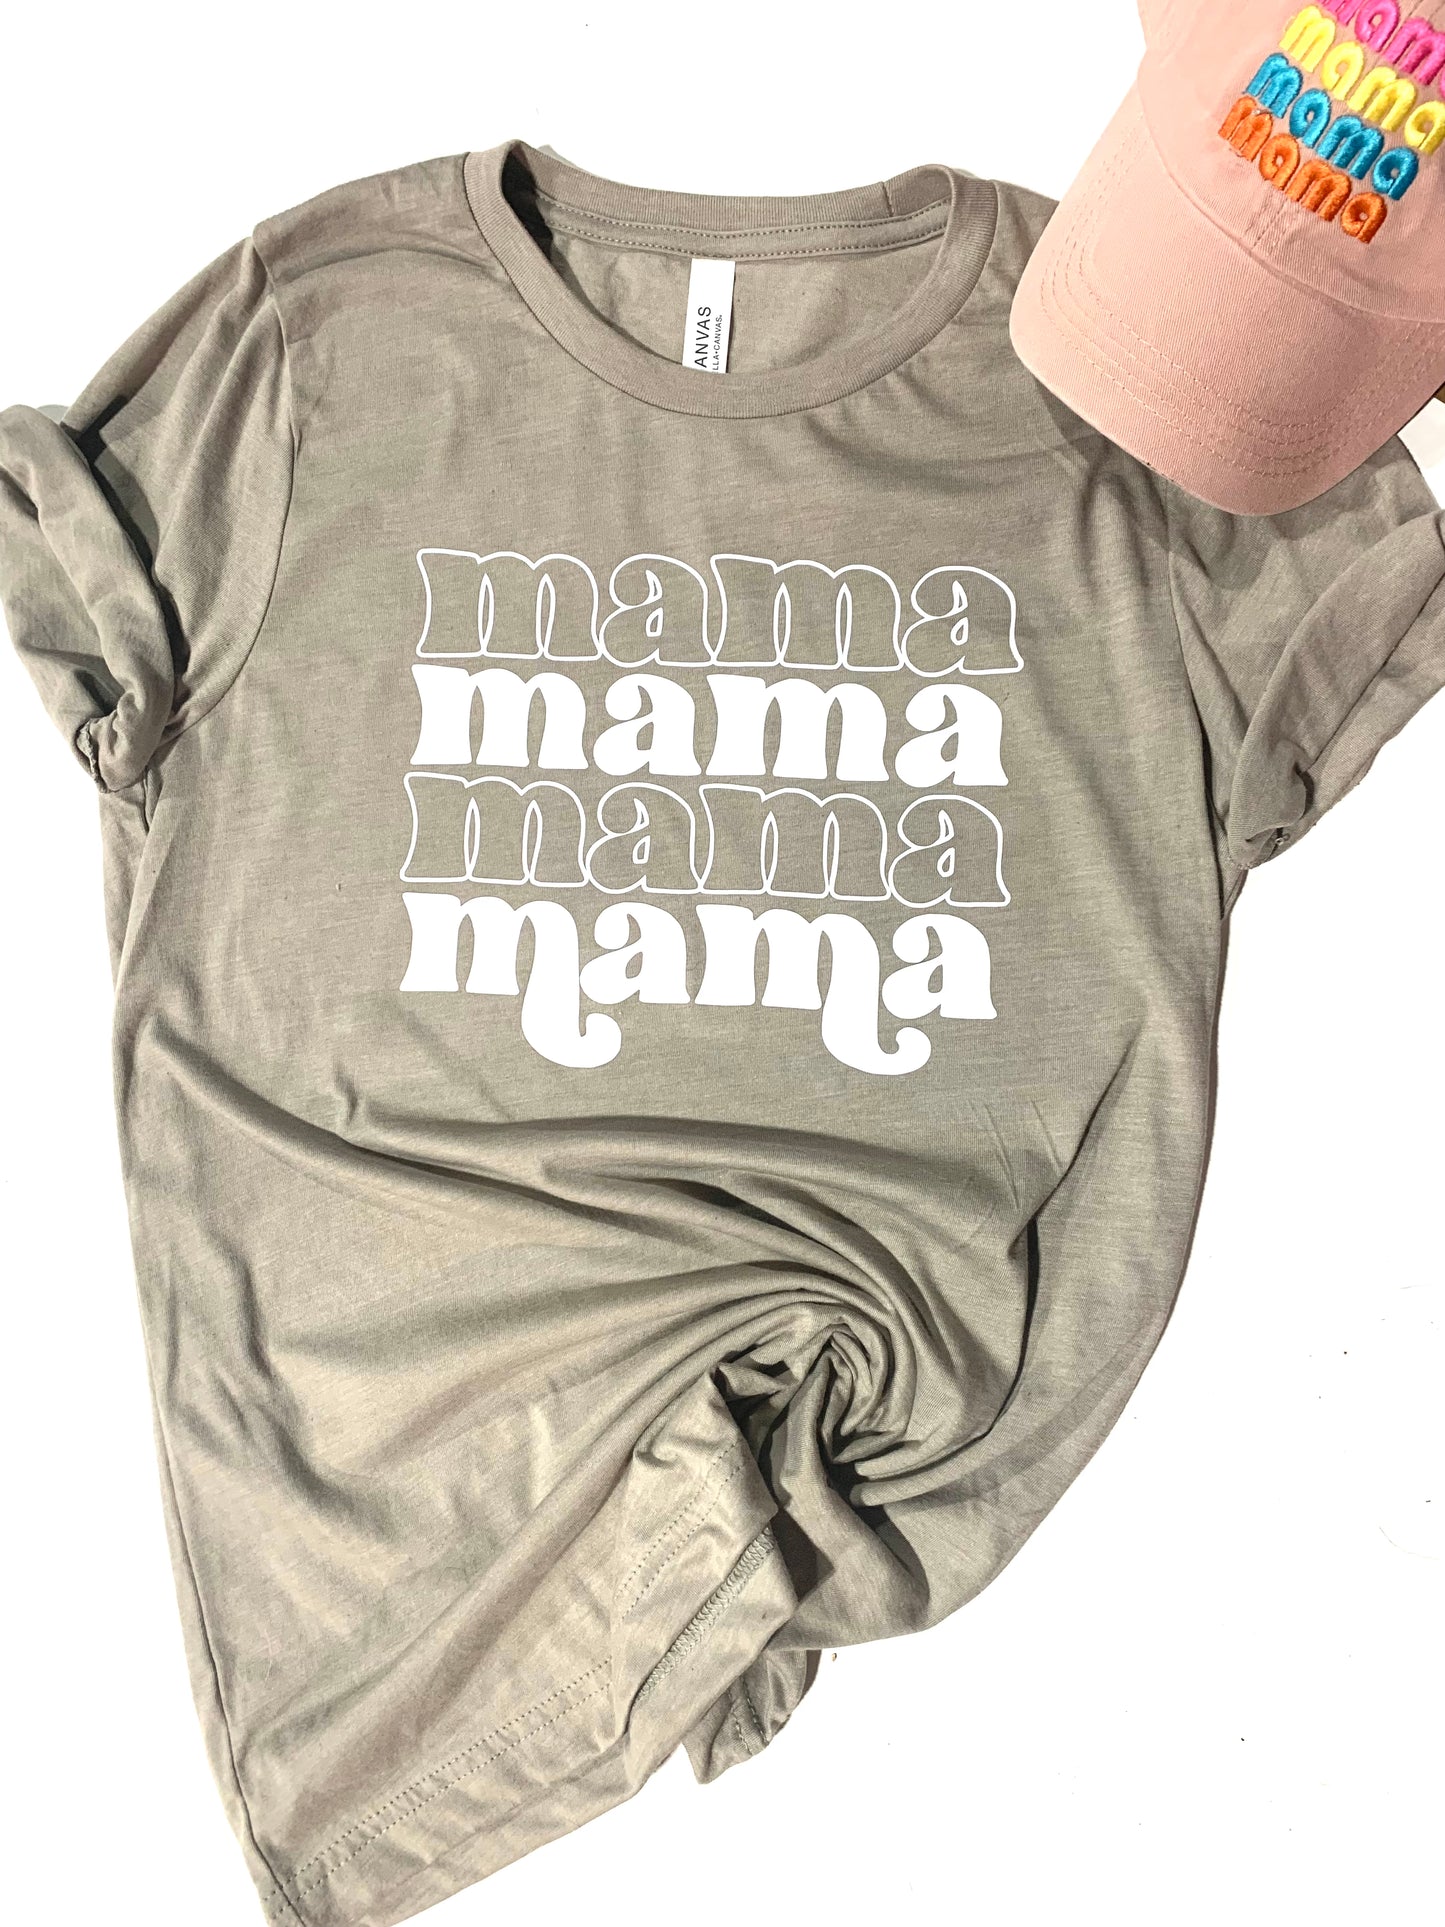 Neutral mama graphic tee